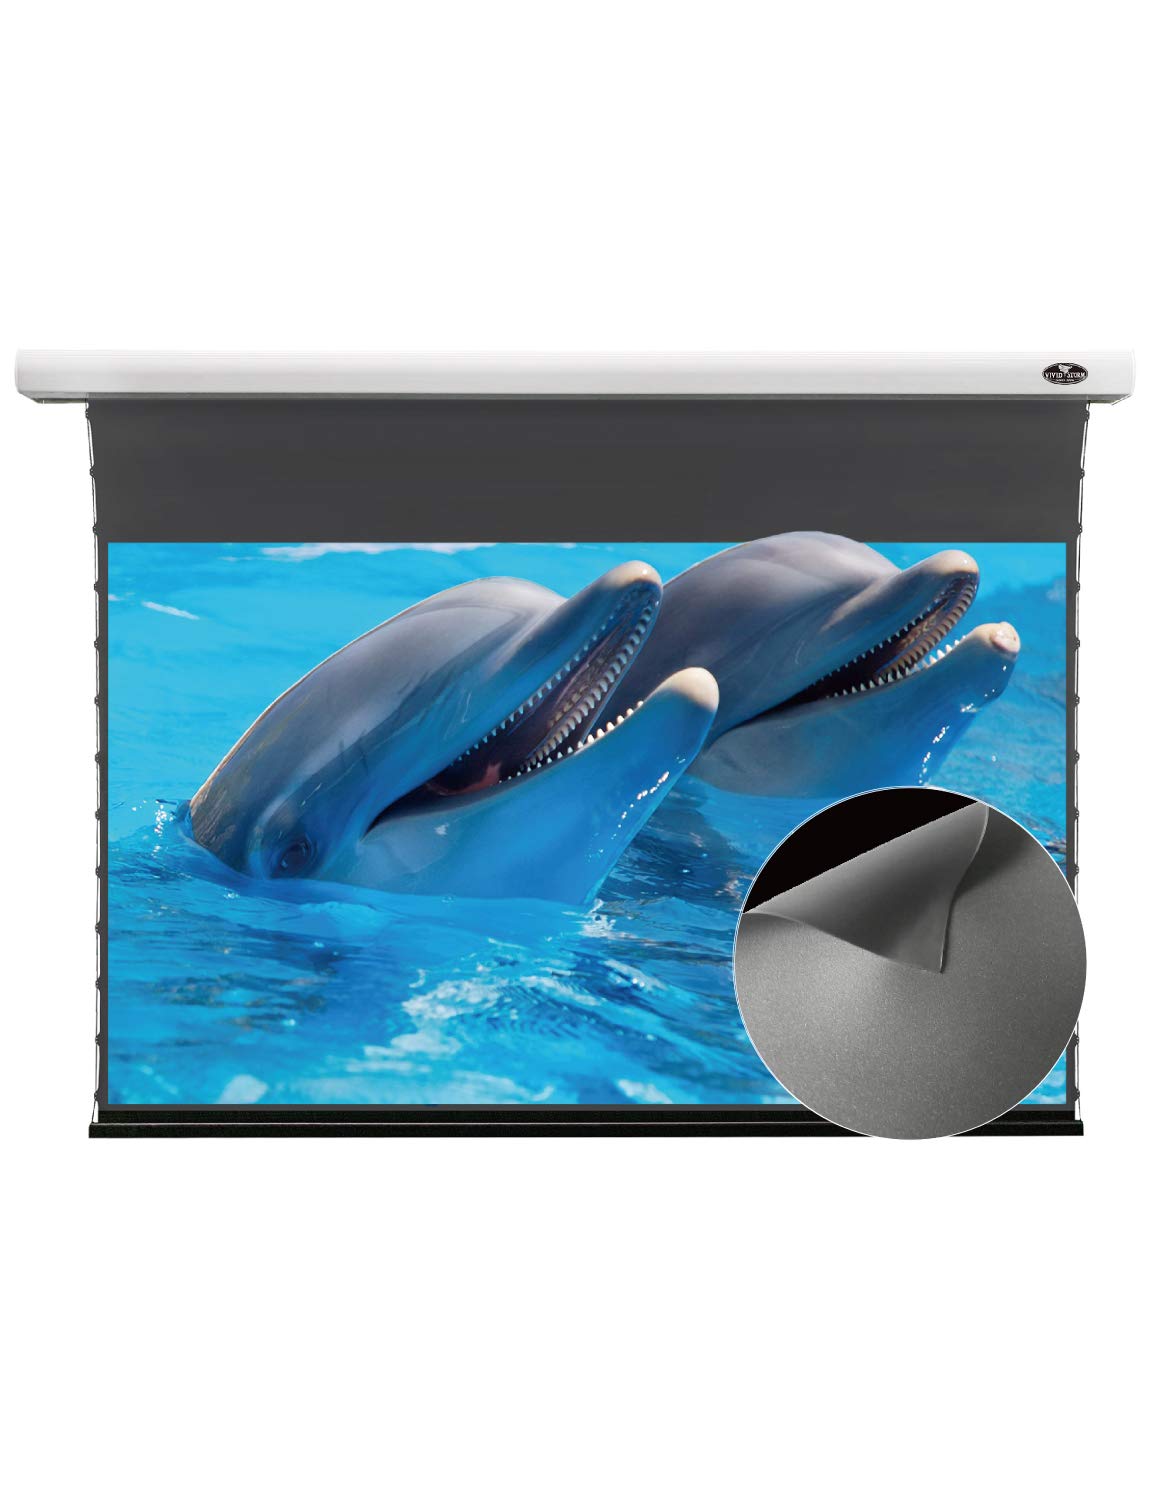 VIVIDSTORM-Projection Screen,Obsidian Long Focus ALR Slimline Motorized Office Presentation,Indoor Stand Movie Screen,Compatible with Lumen up to 2...